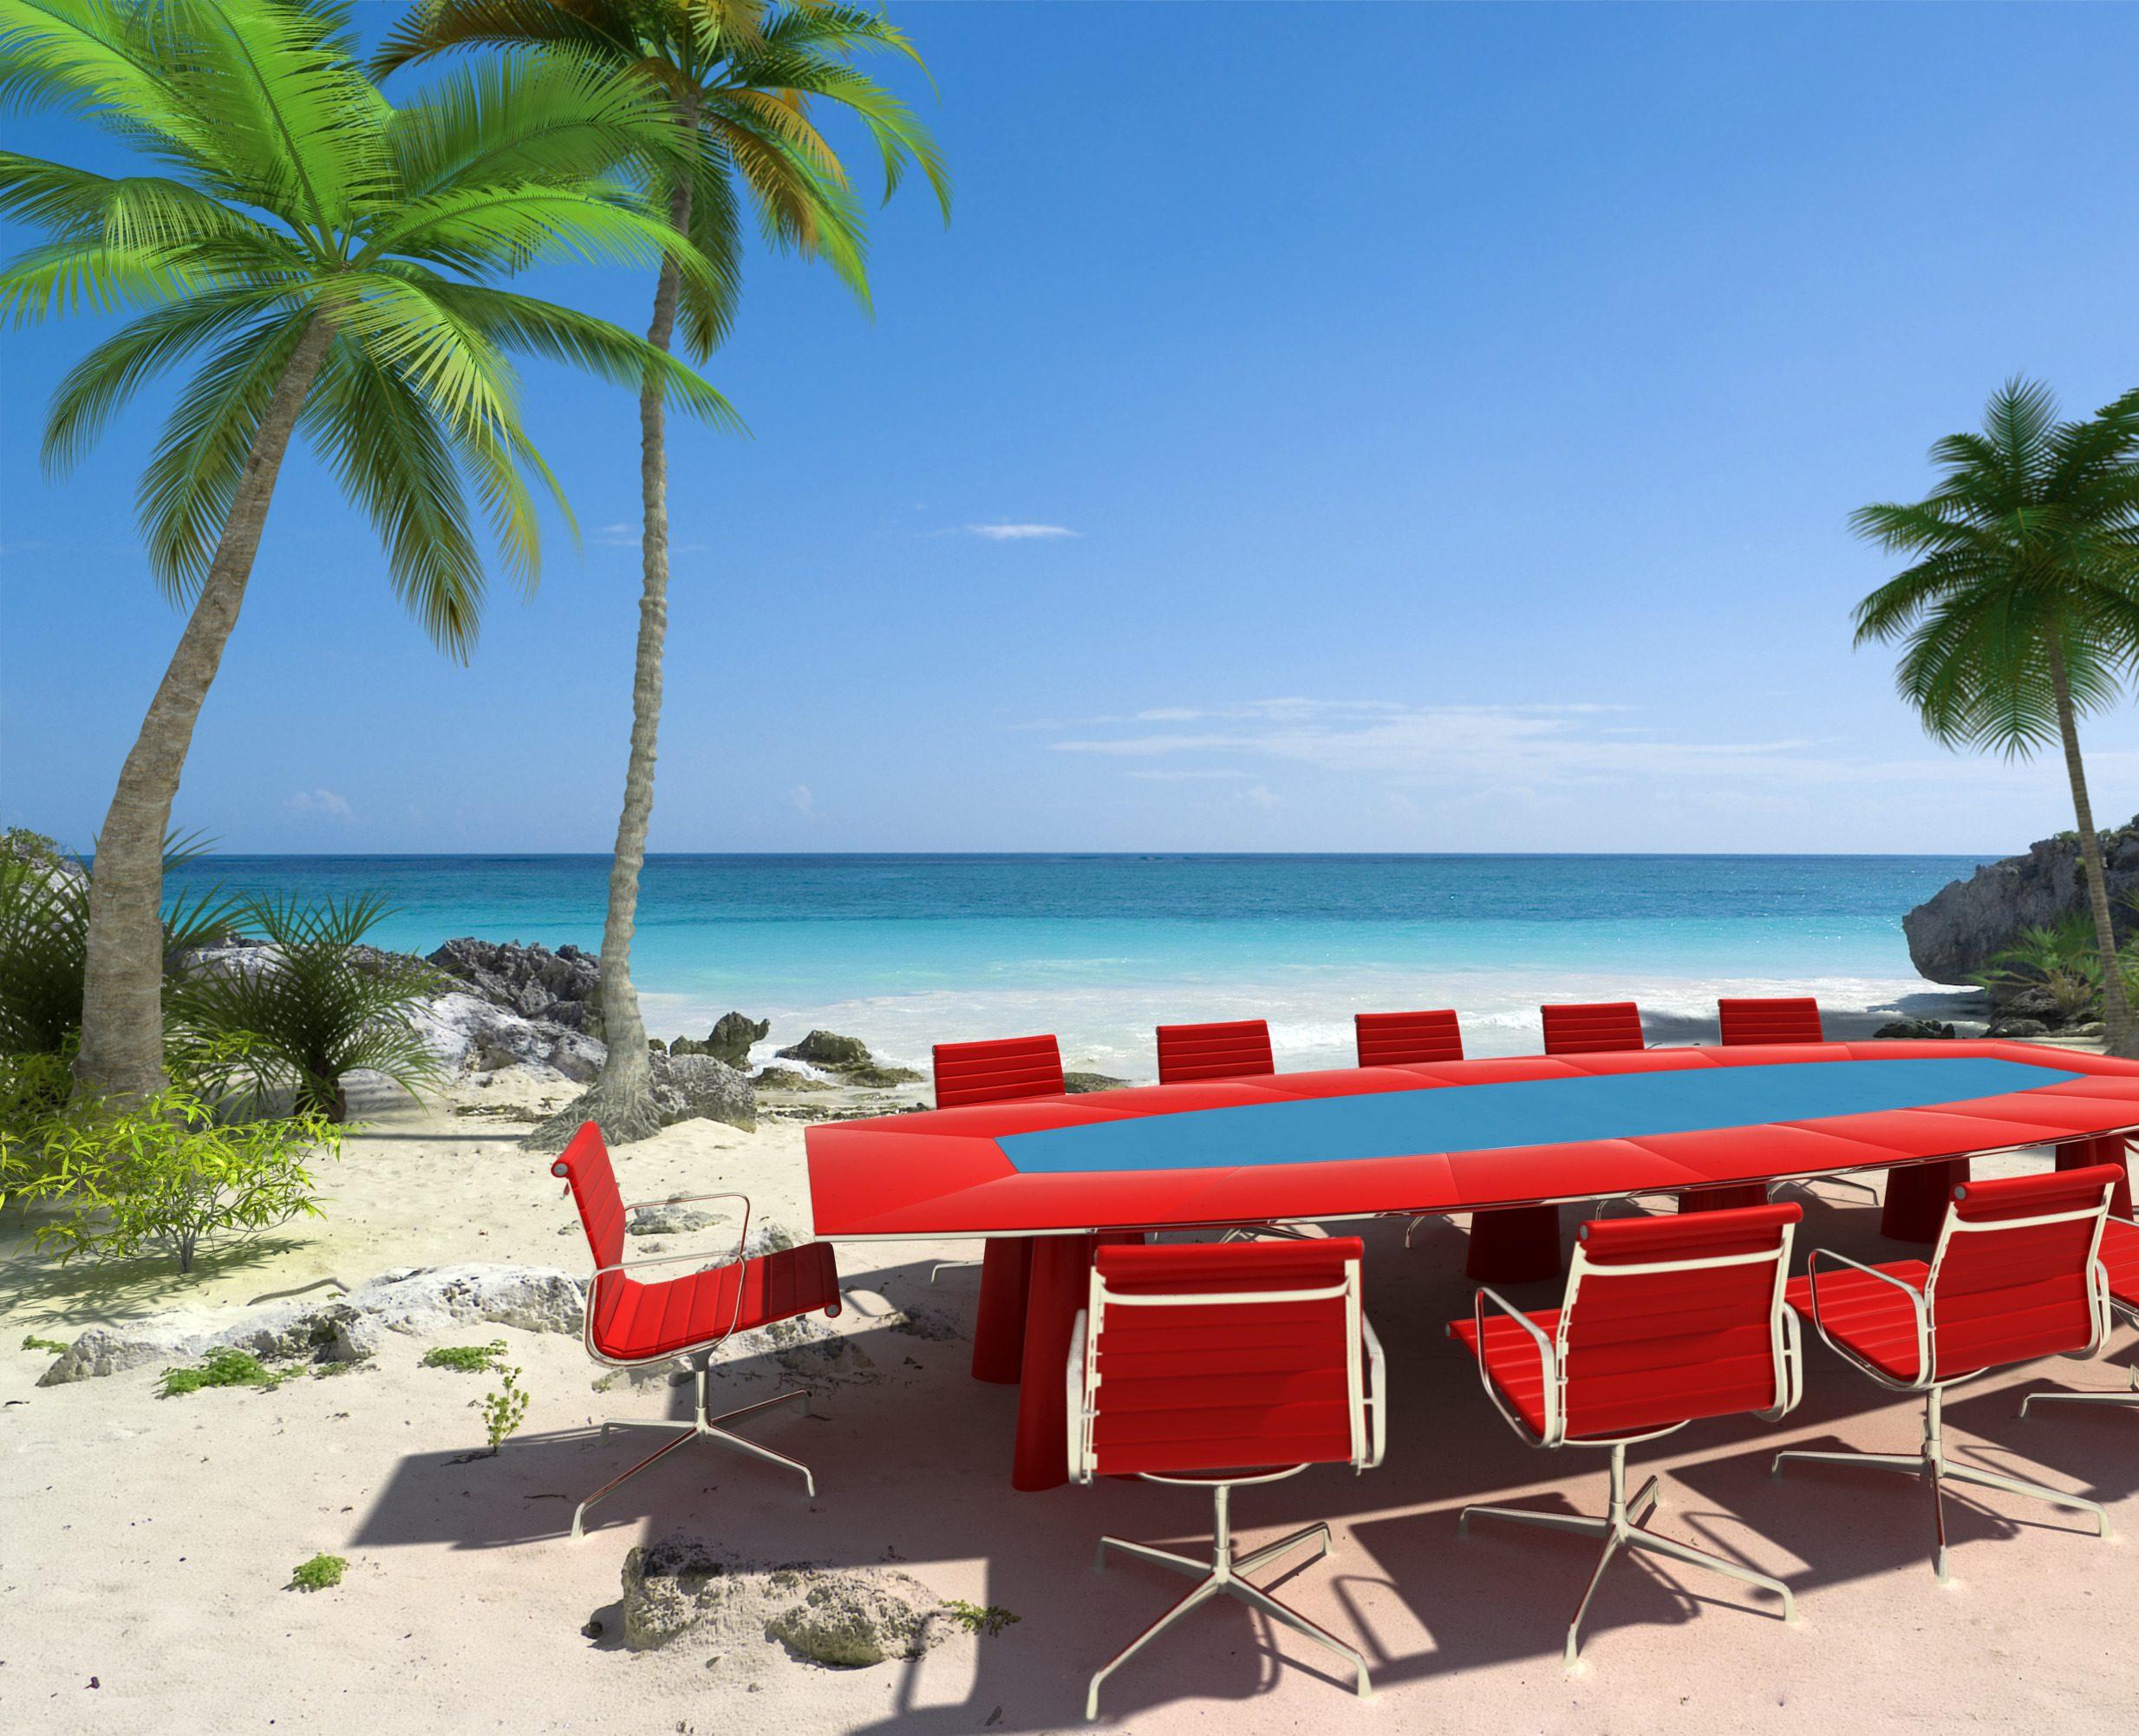 3D rendering of a meeting room in a beautiful tropical beach